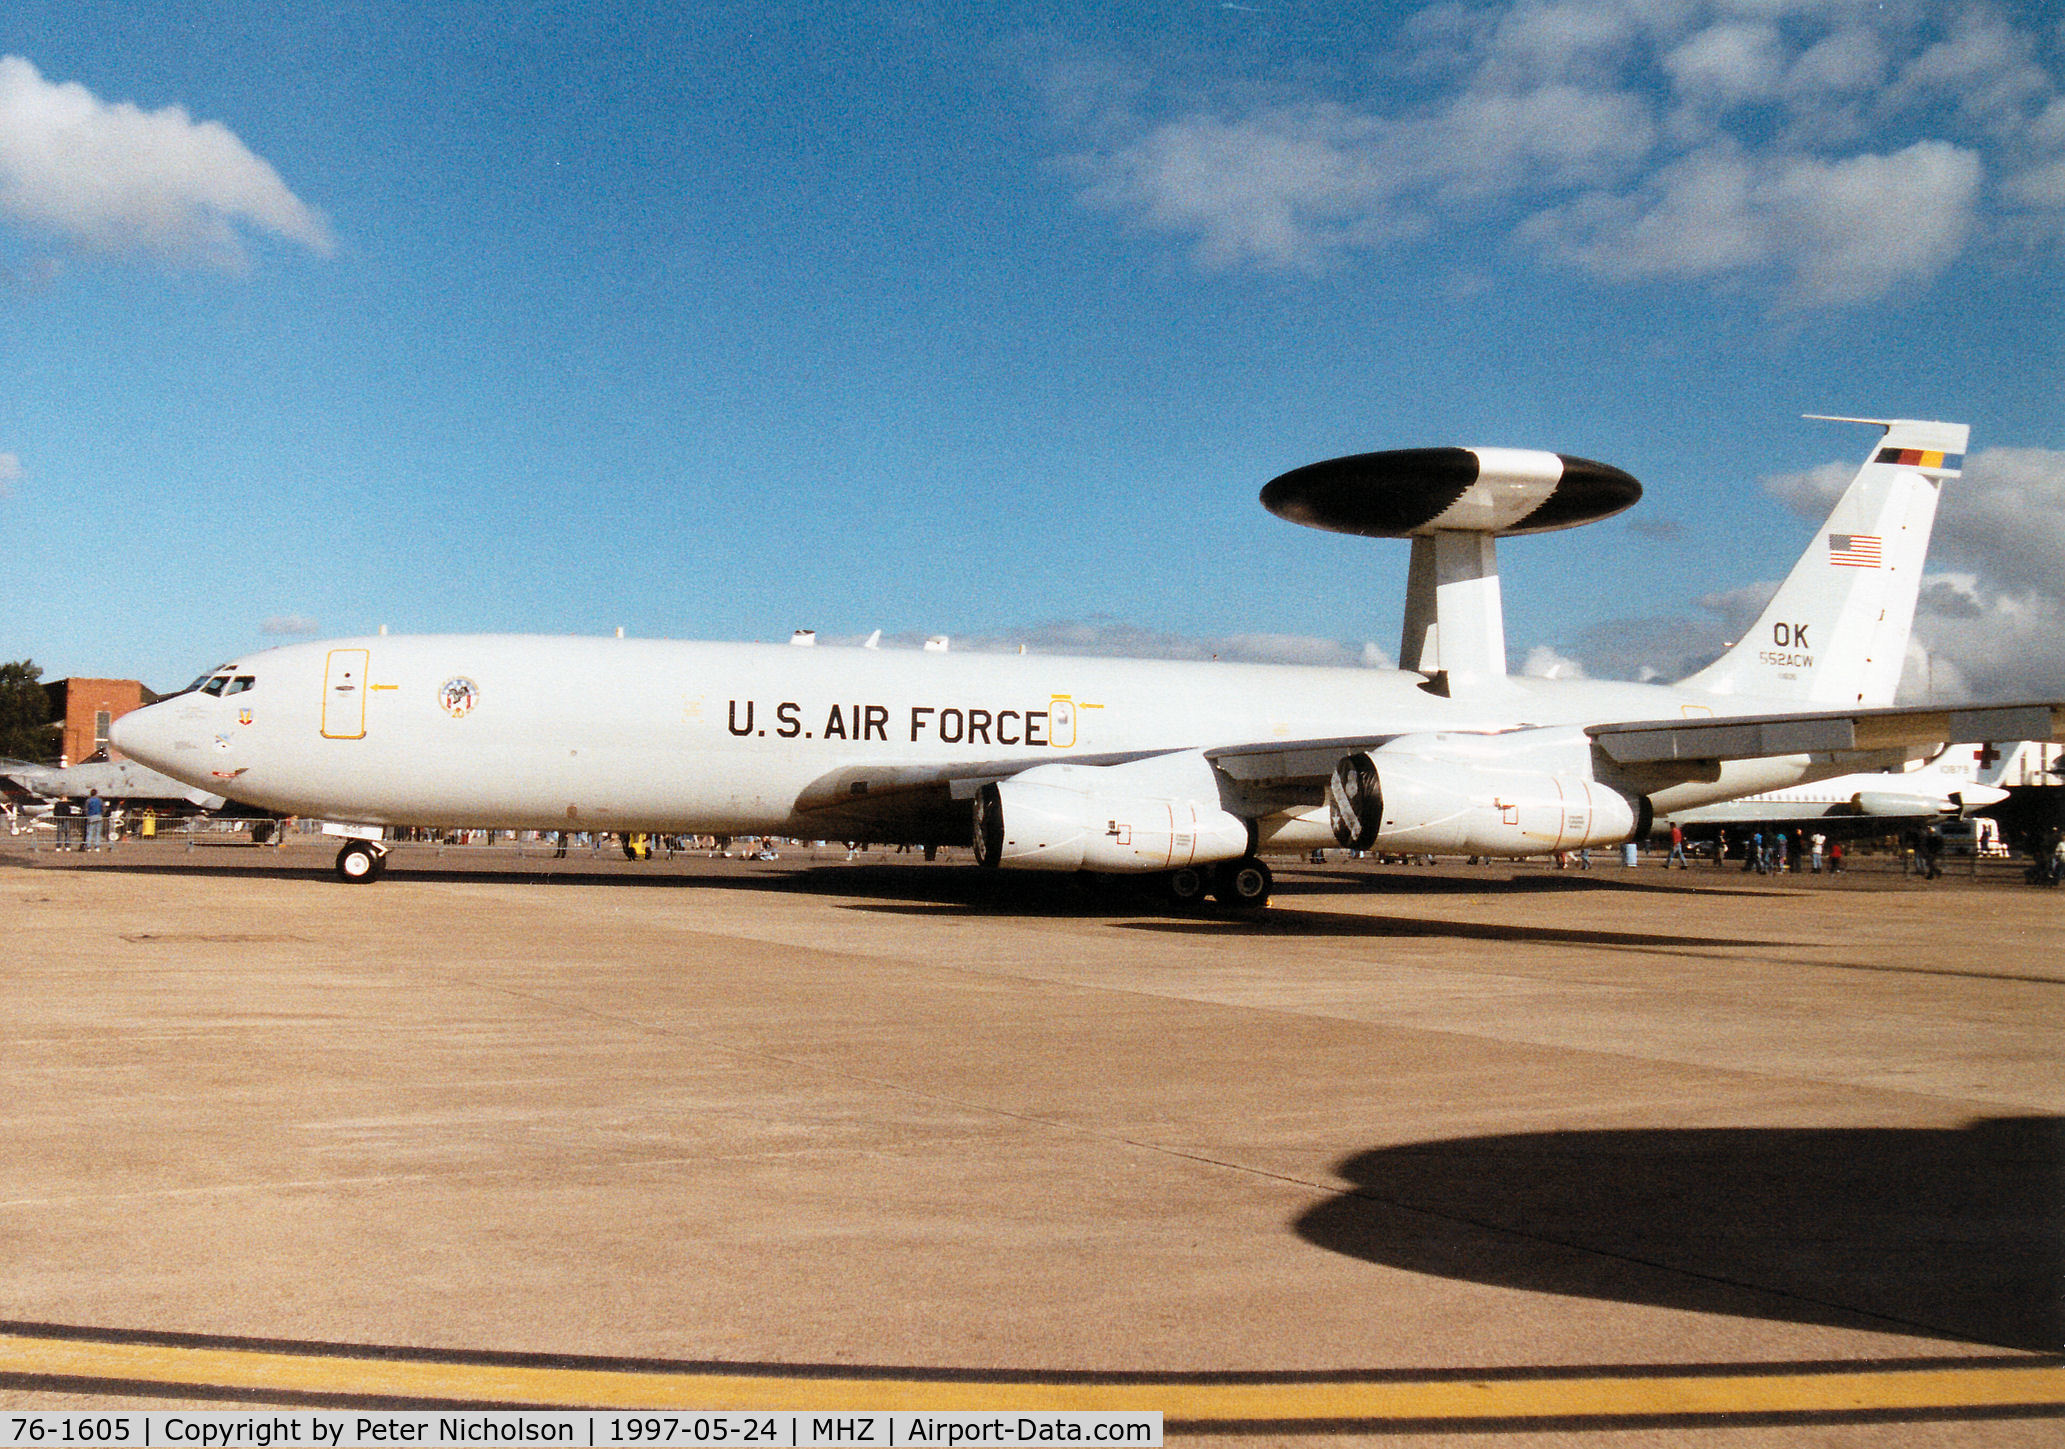 76-1605, 1976 Boeing E-3B Sentry C/N 21435/924, E-3B Sentry, callsign Shuck 87, of the 552nd Air Control Wing at Tinker AFB on display at the 1997 RAF Mildenhall Air Fete.